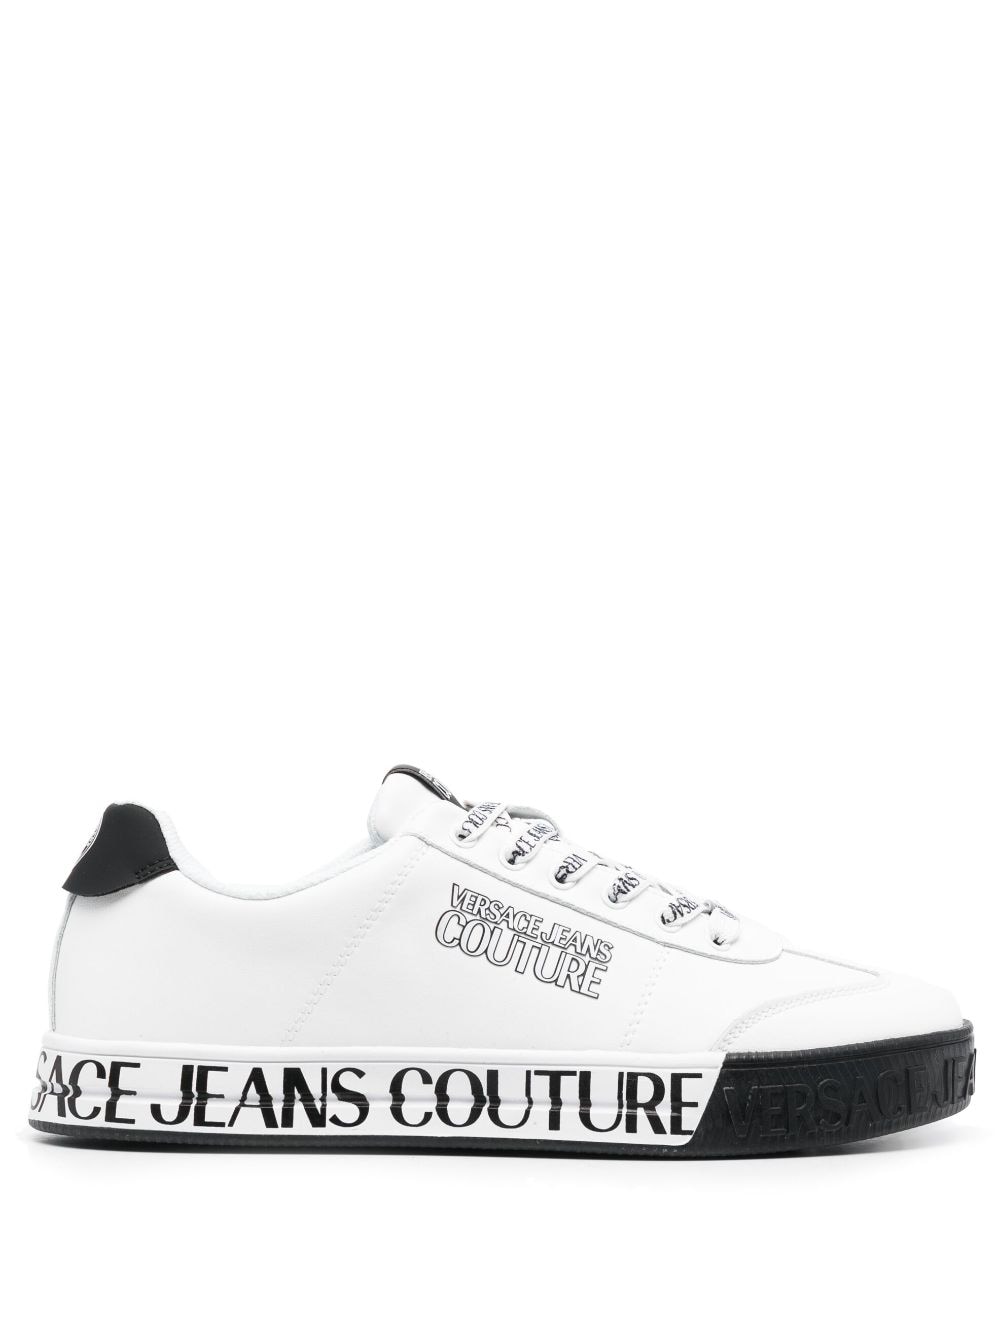 Versace Jeans Couture logo-print leather low-top sneakers - White von Versace Jeans Couture